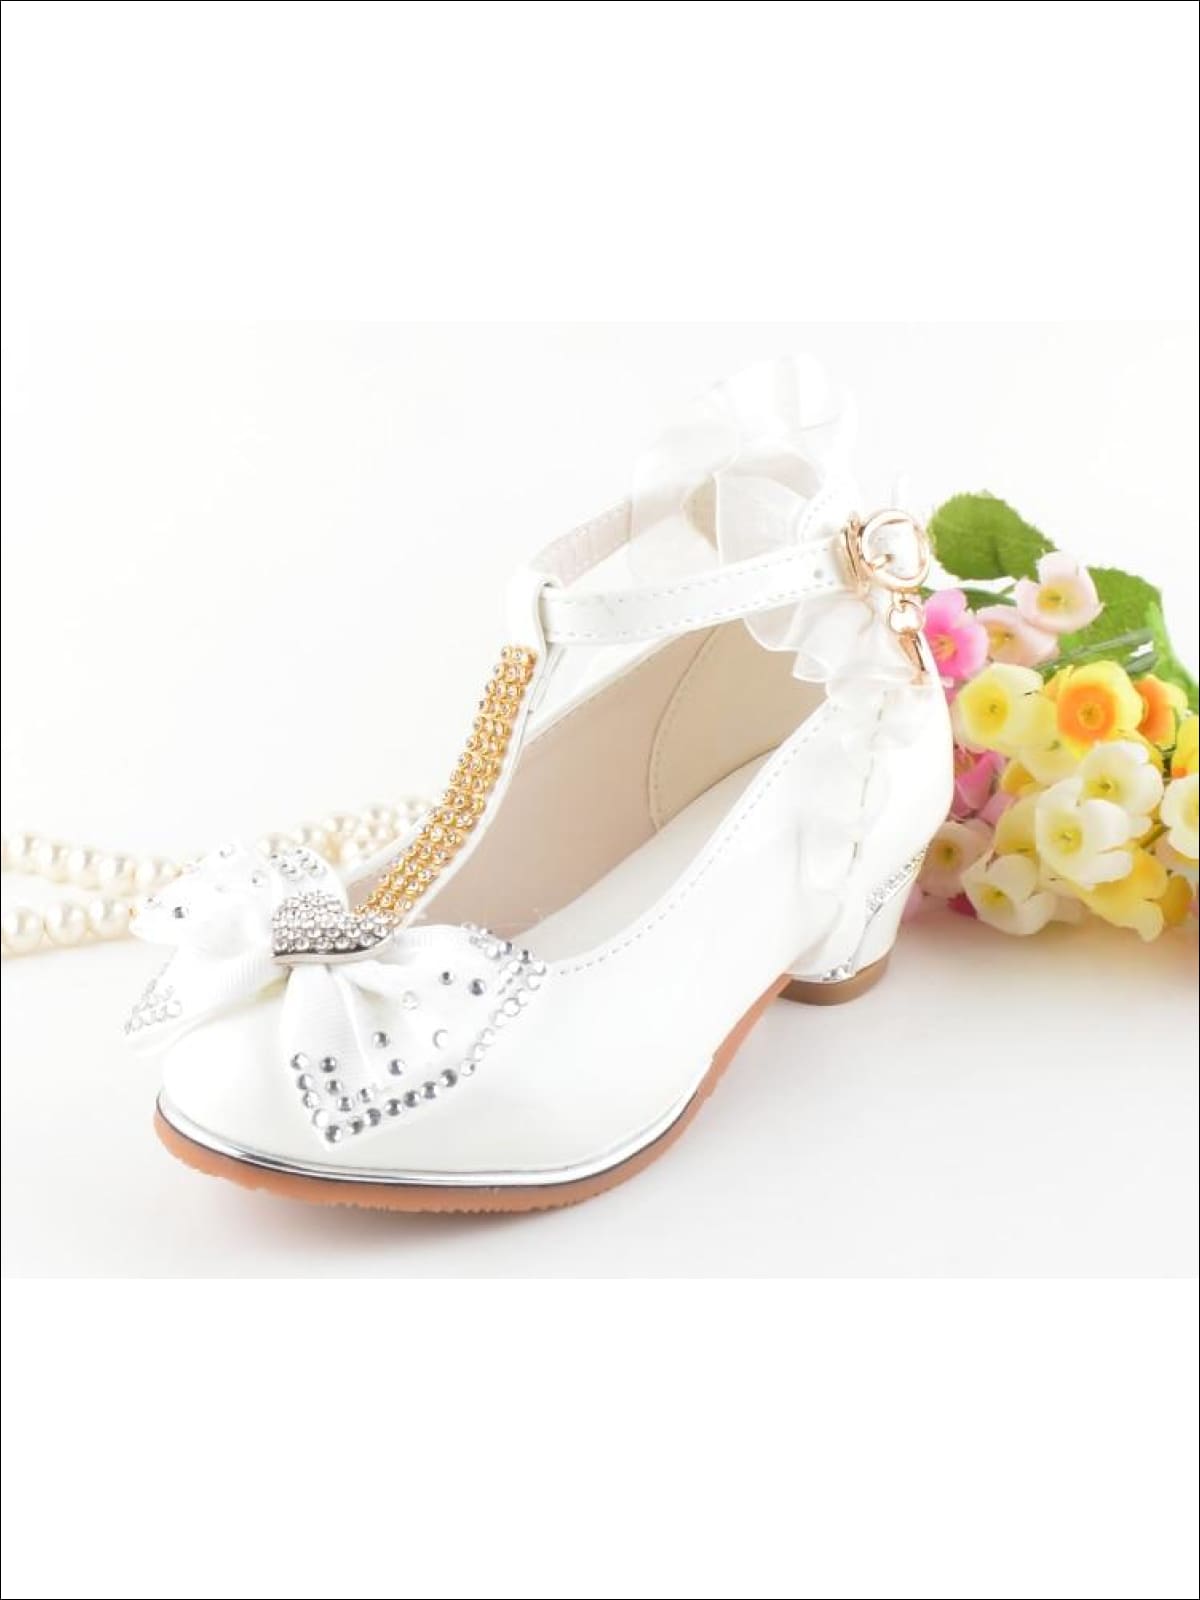 Shoes By Liv & Mia | Girls Frilly Rhinestone Bow Tie Princess Shoes